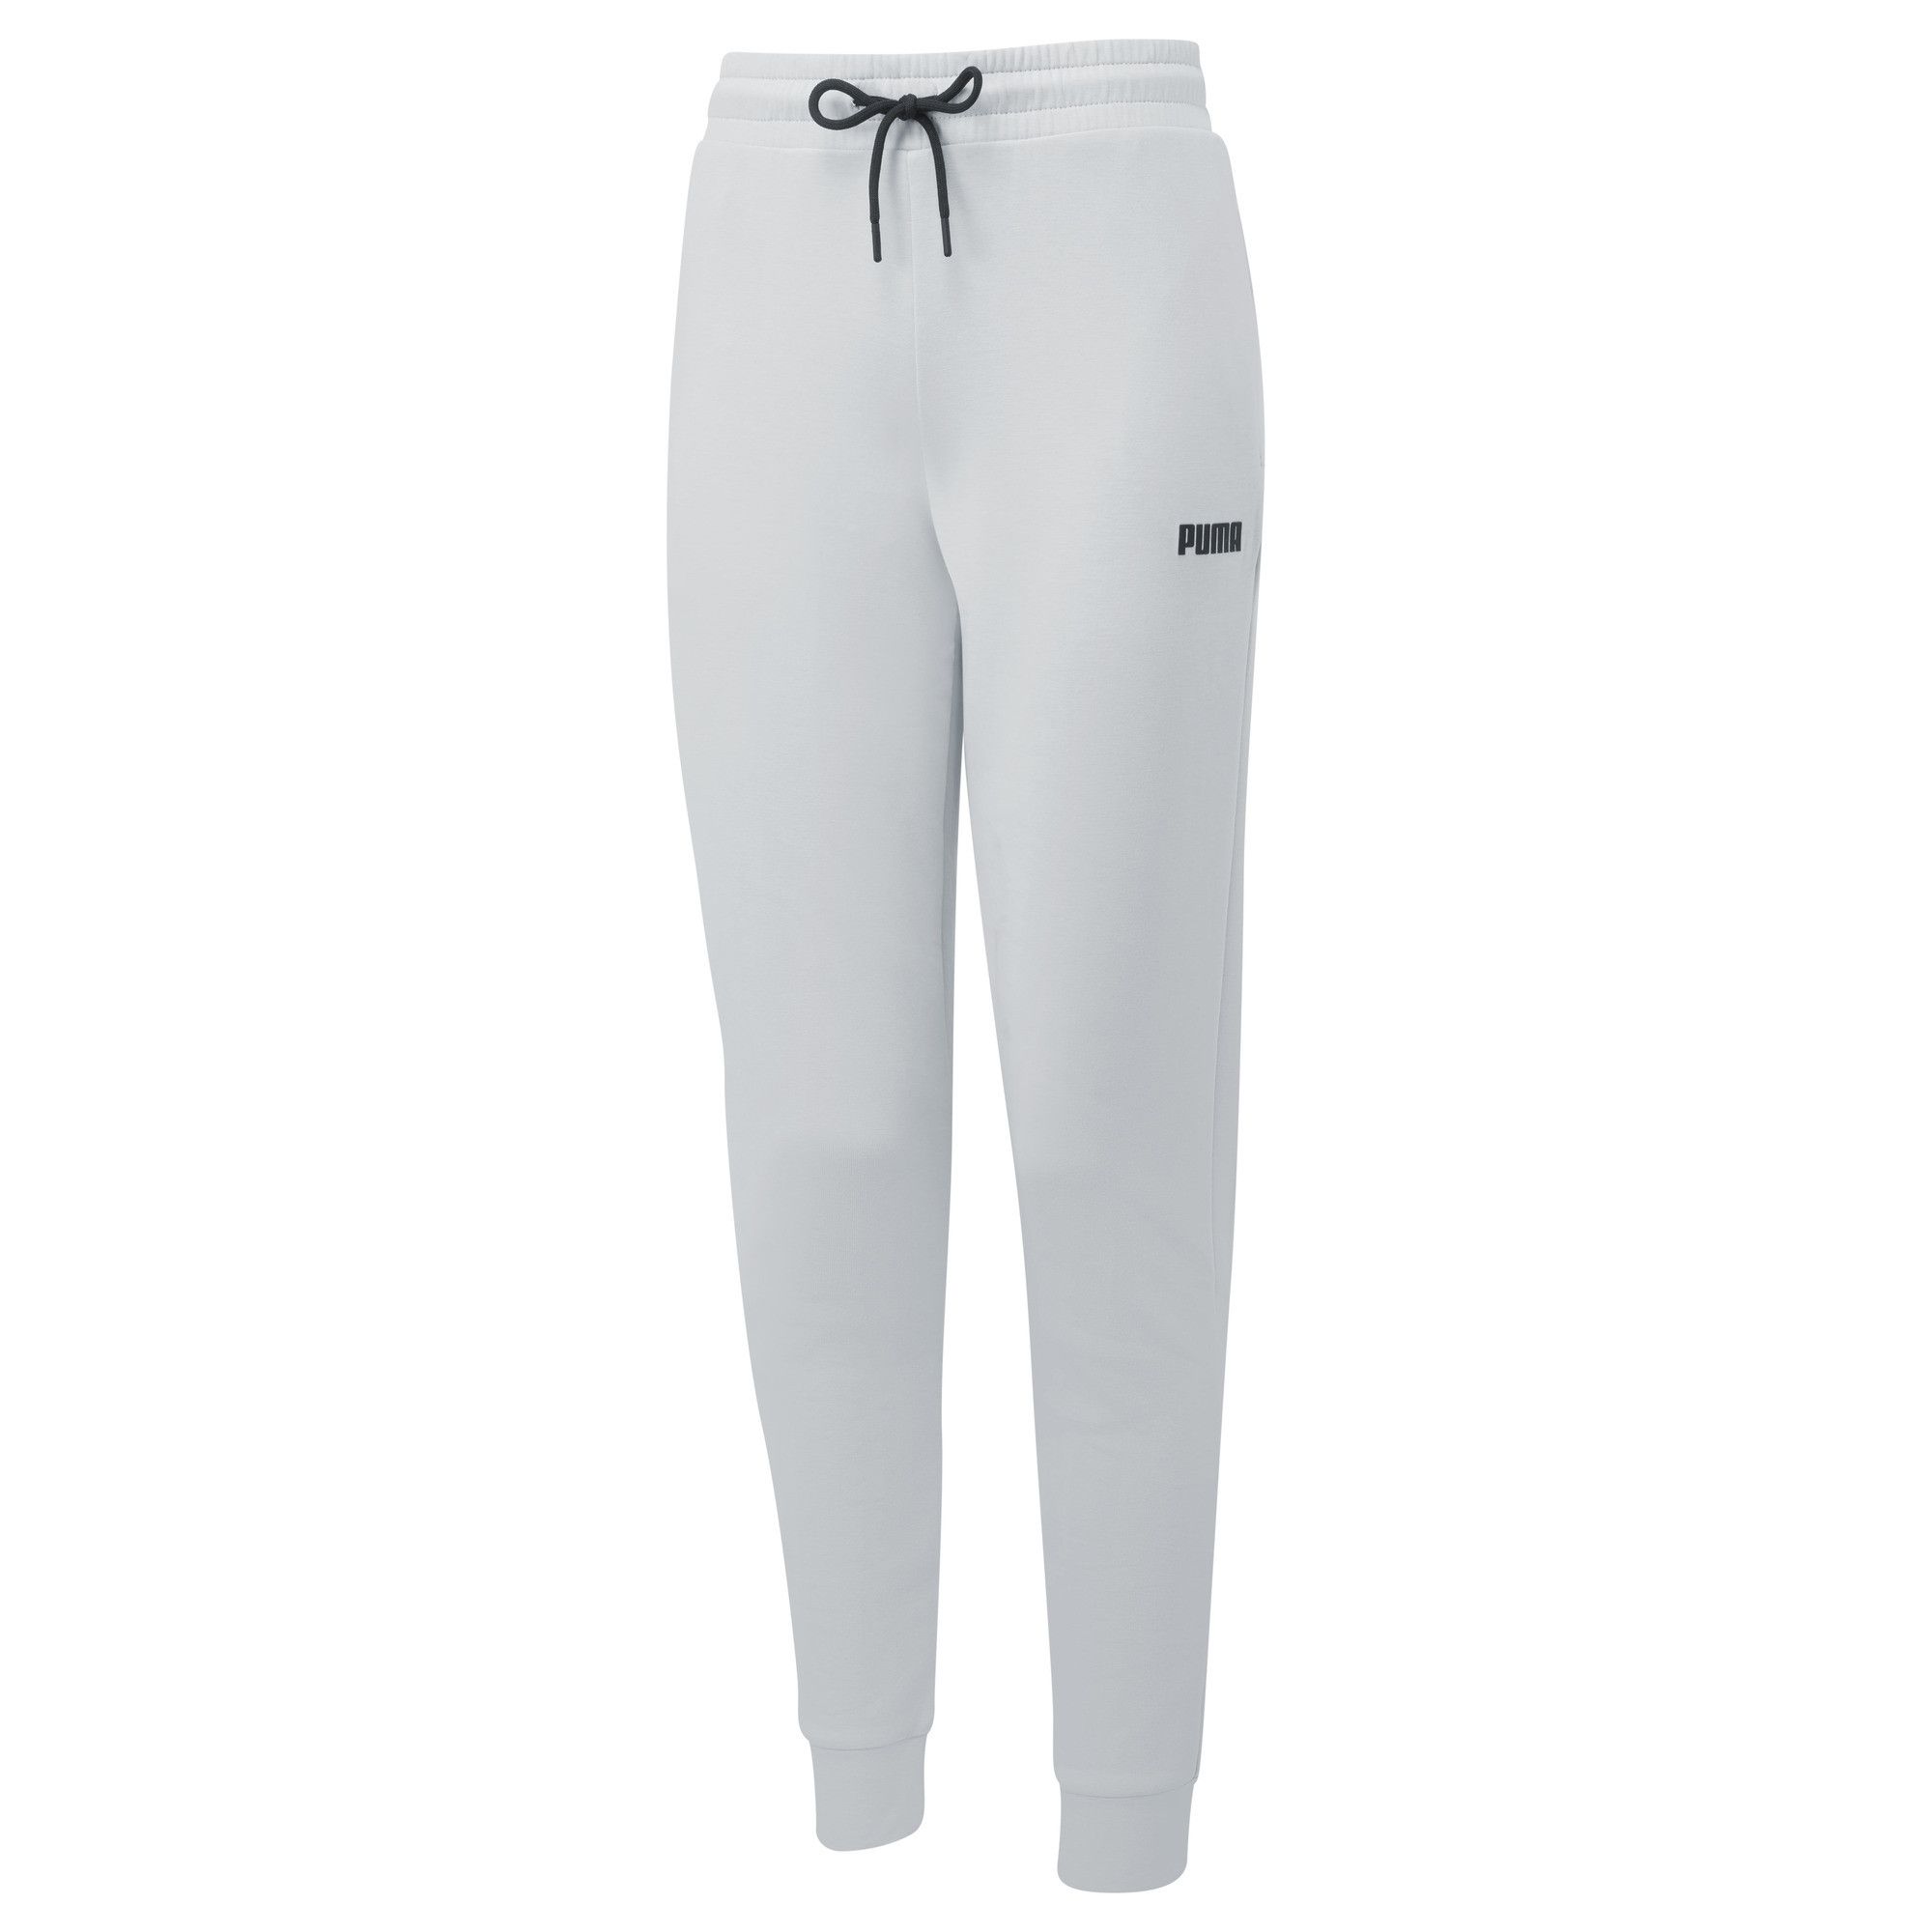  Perfect for relaxing at home or heading out, the SPACER Pants will keep you dry and fresh, thanks to their moisture-wicking material. DETAILS Slim fitComfortable style by PUMAPUMA branding detailsSignature PUMA design elements